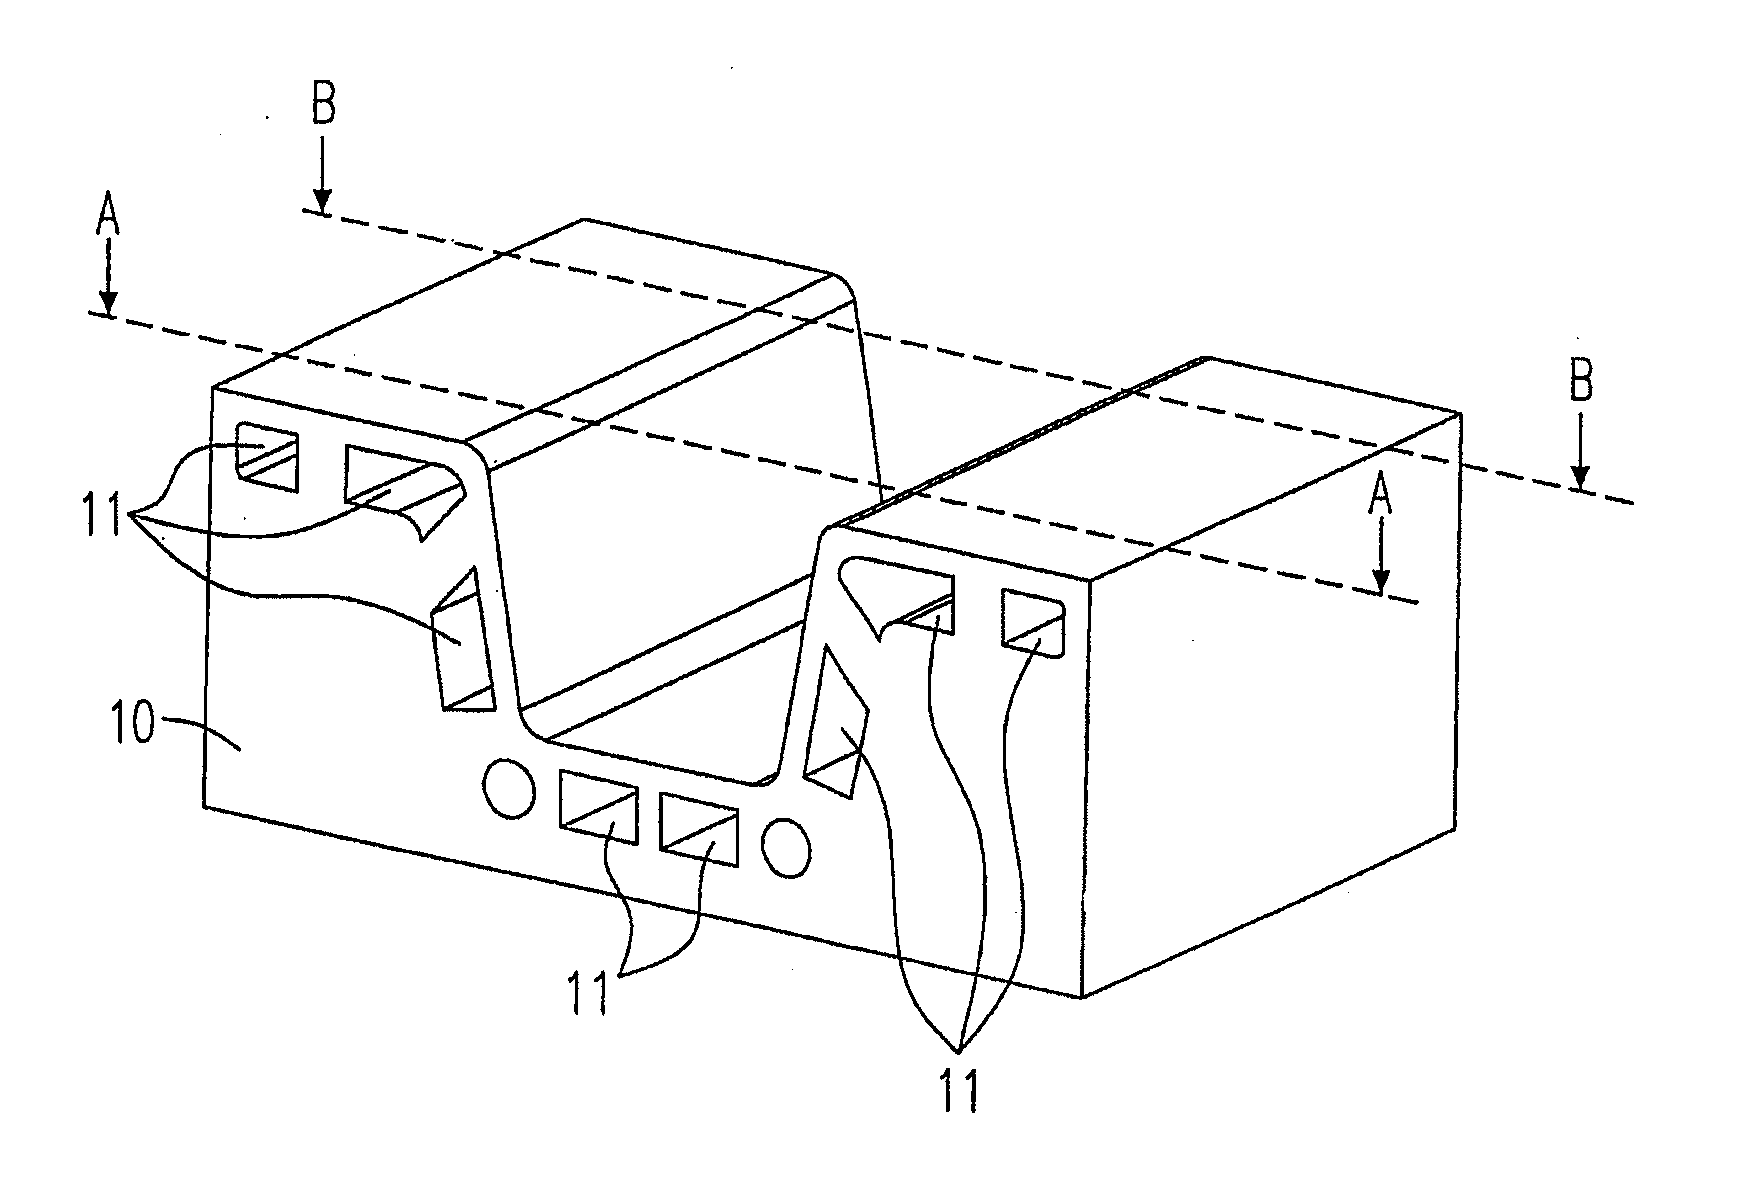 Mold and method for sectionally adjusting cooling efficiency of the mold